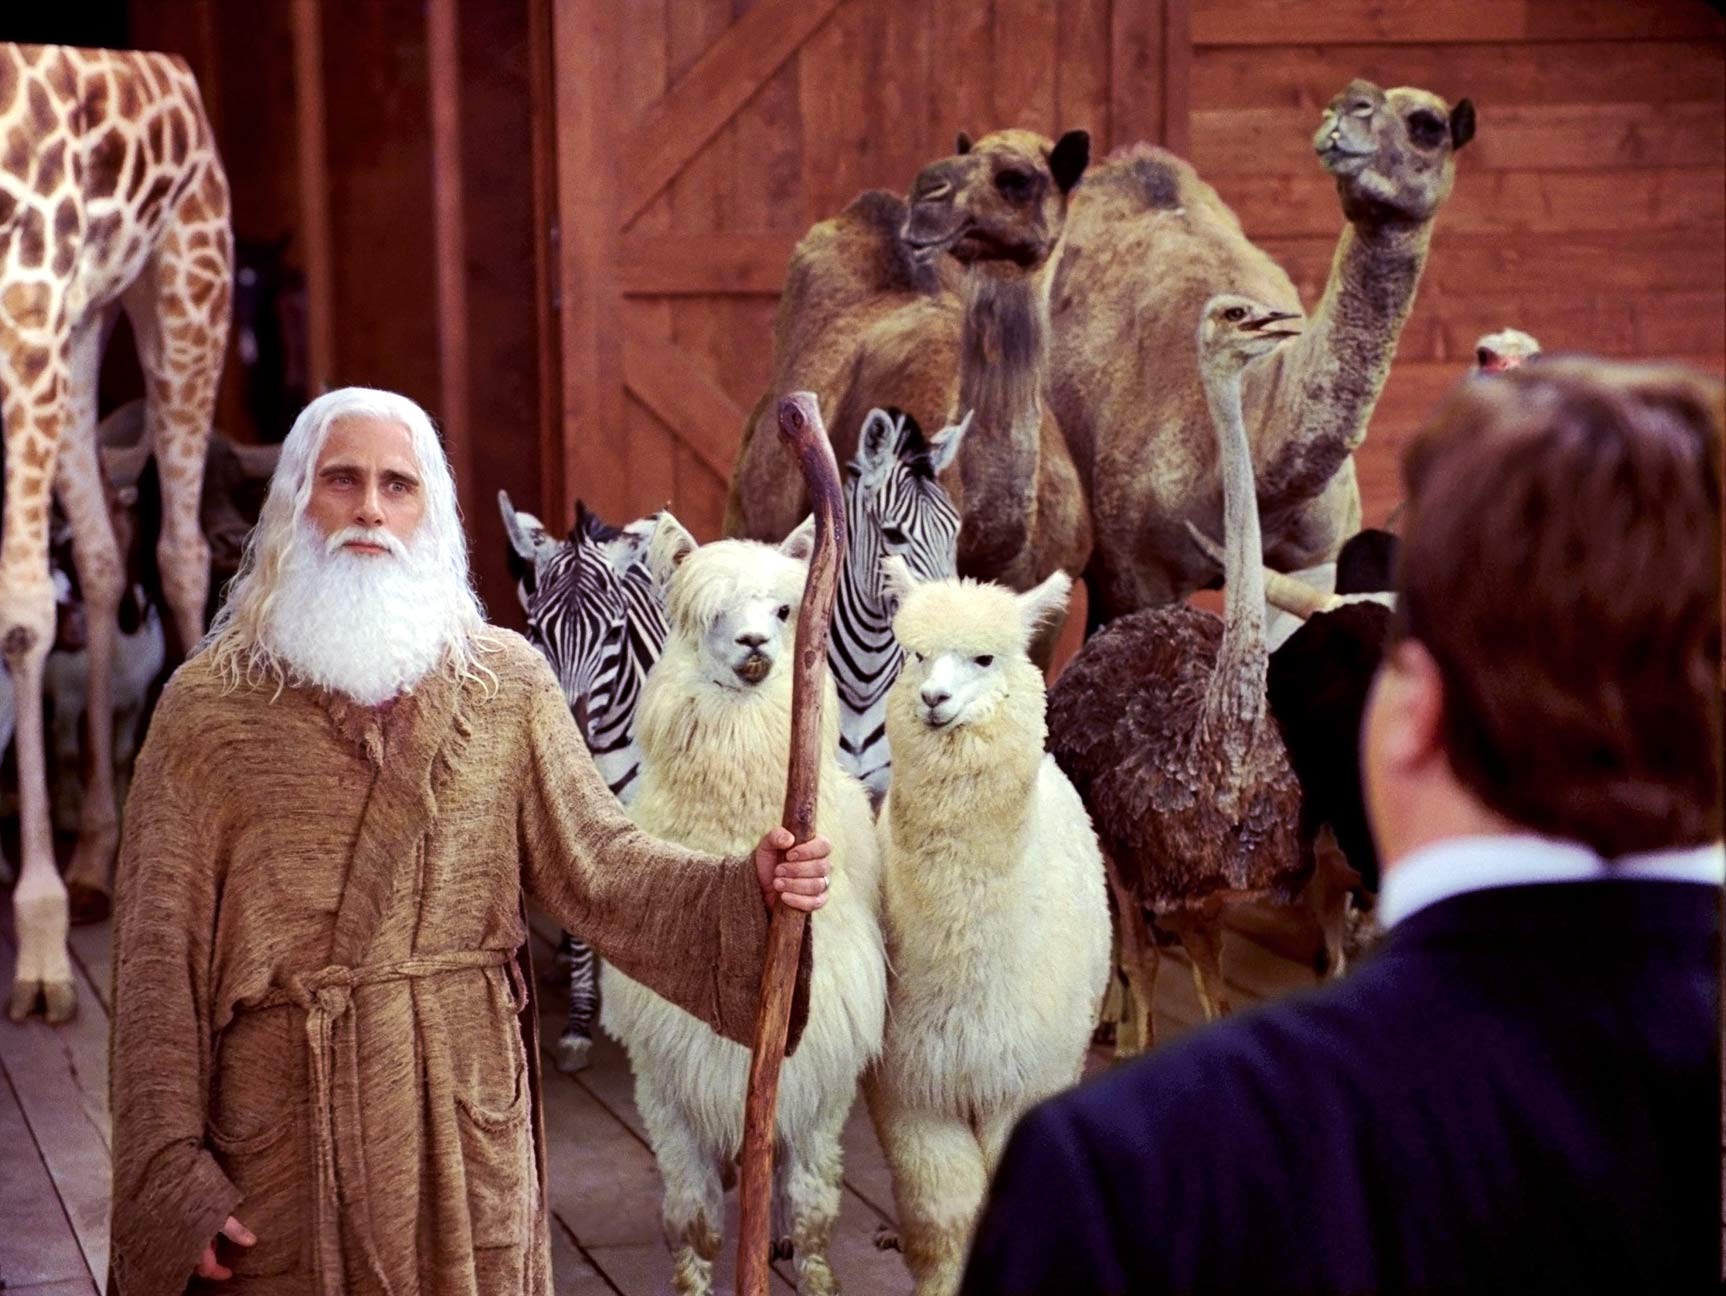 Evan Almighty (2007)
                              Despite the film’s being a comedy, Steve Carell’s modern-day Noah had a charming sense of heart and faith that appealed to all audiences